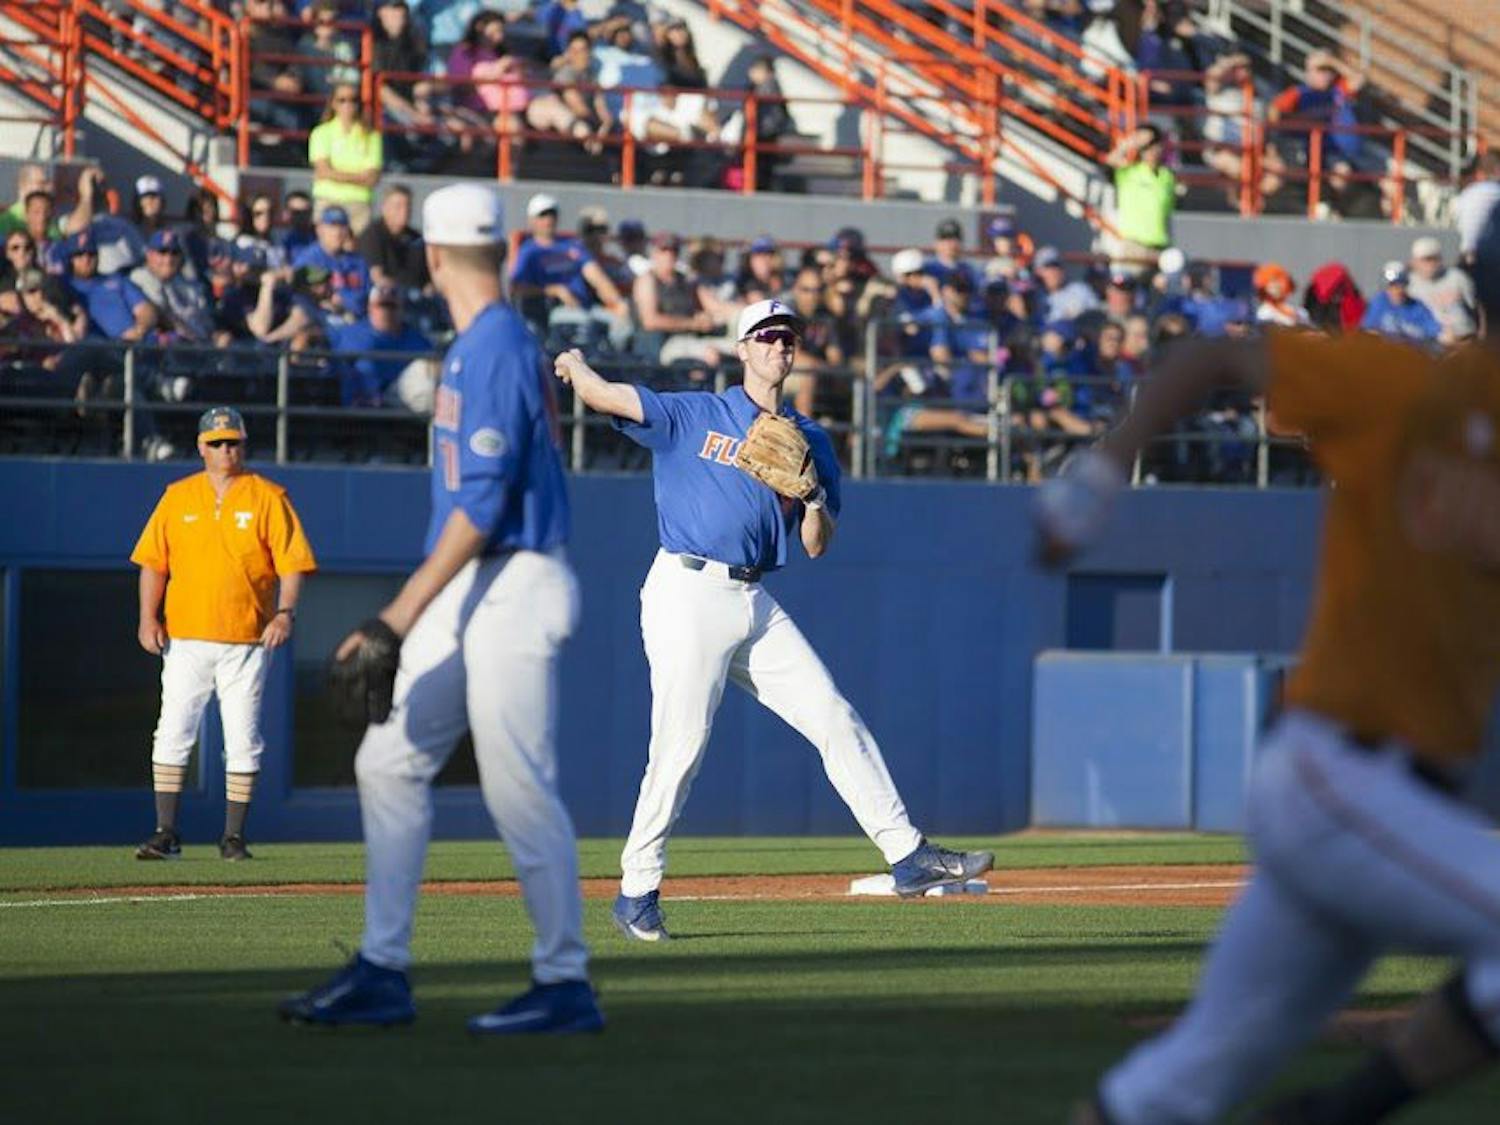 UF infielder Christian Hicks throws to first on a ground ball during Florida's 3-2 loss in 10 innings to Tennessee on April 8, 2017, at McKethan Stadium.